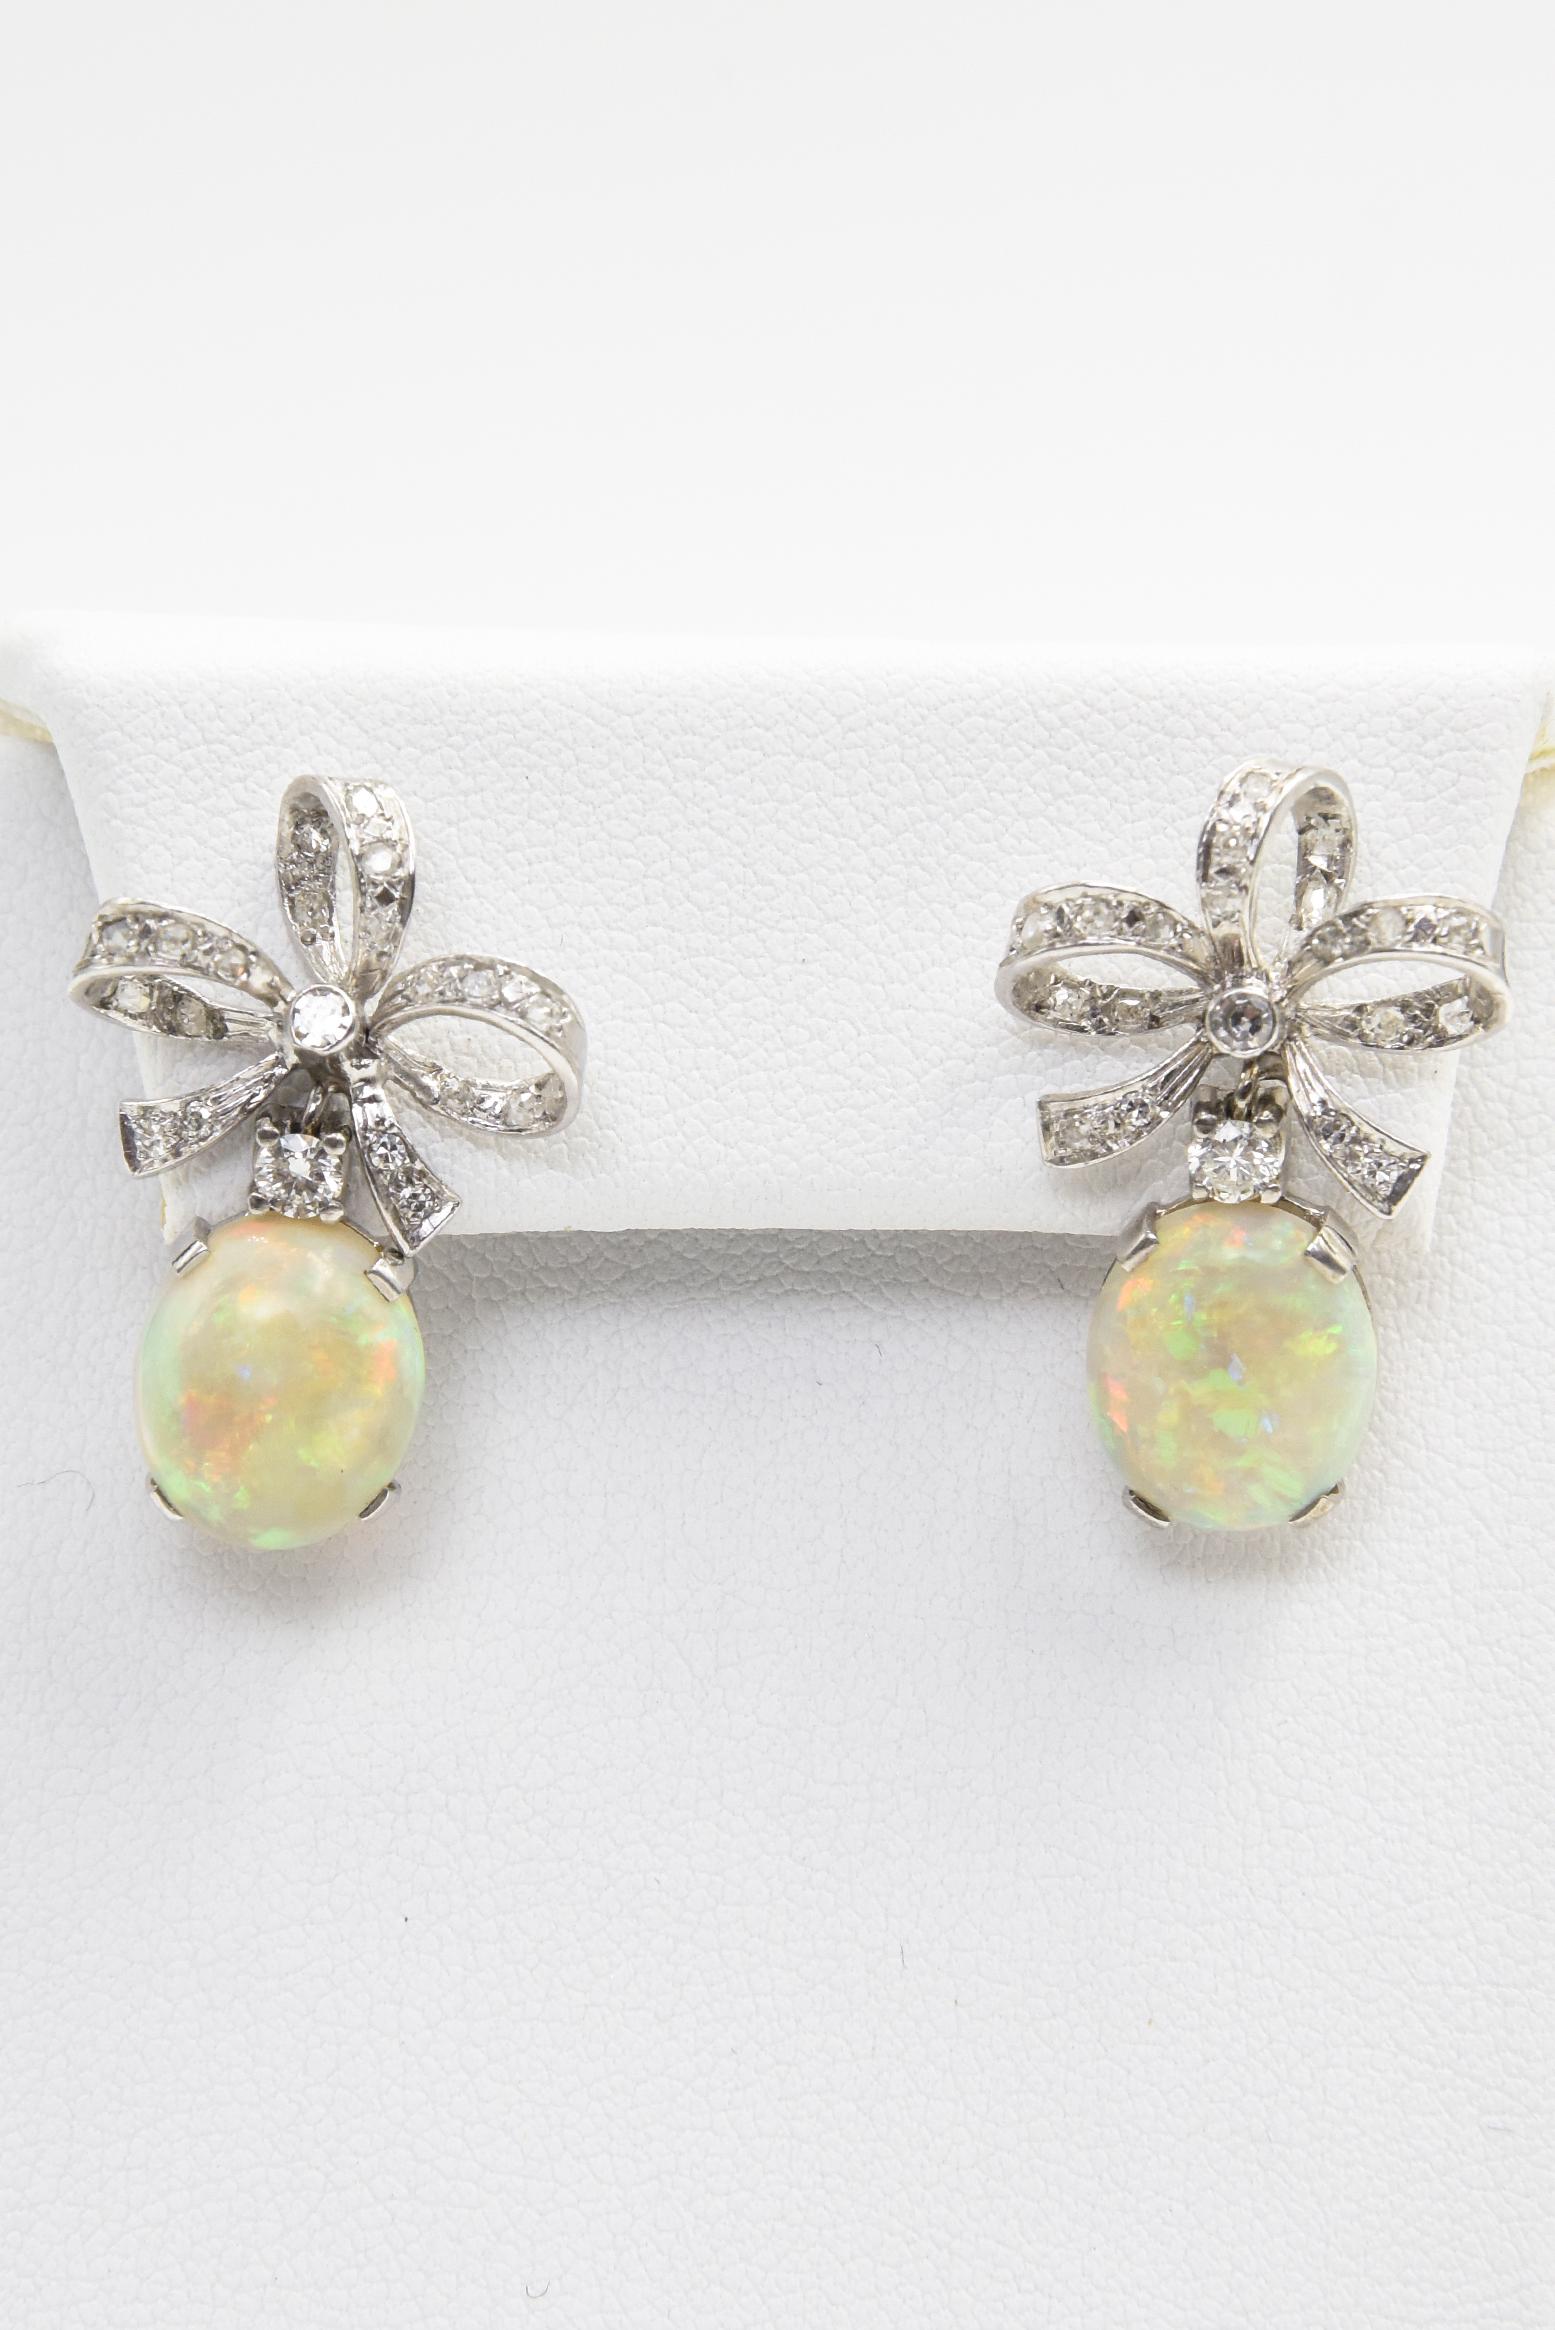 Gorgeous Australian opal with incredible blue, green, red and yellow play of color dangling from a diamond three dimensional bow set in 14k white gold.  The opals measure approximately 10mm x 12 mm.  The earrings measure 1.06